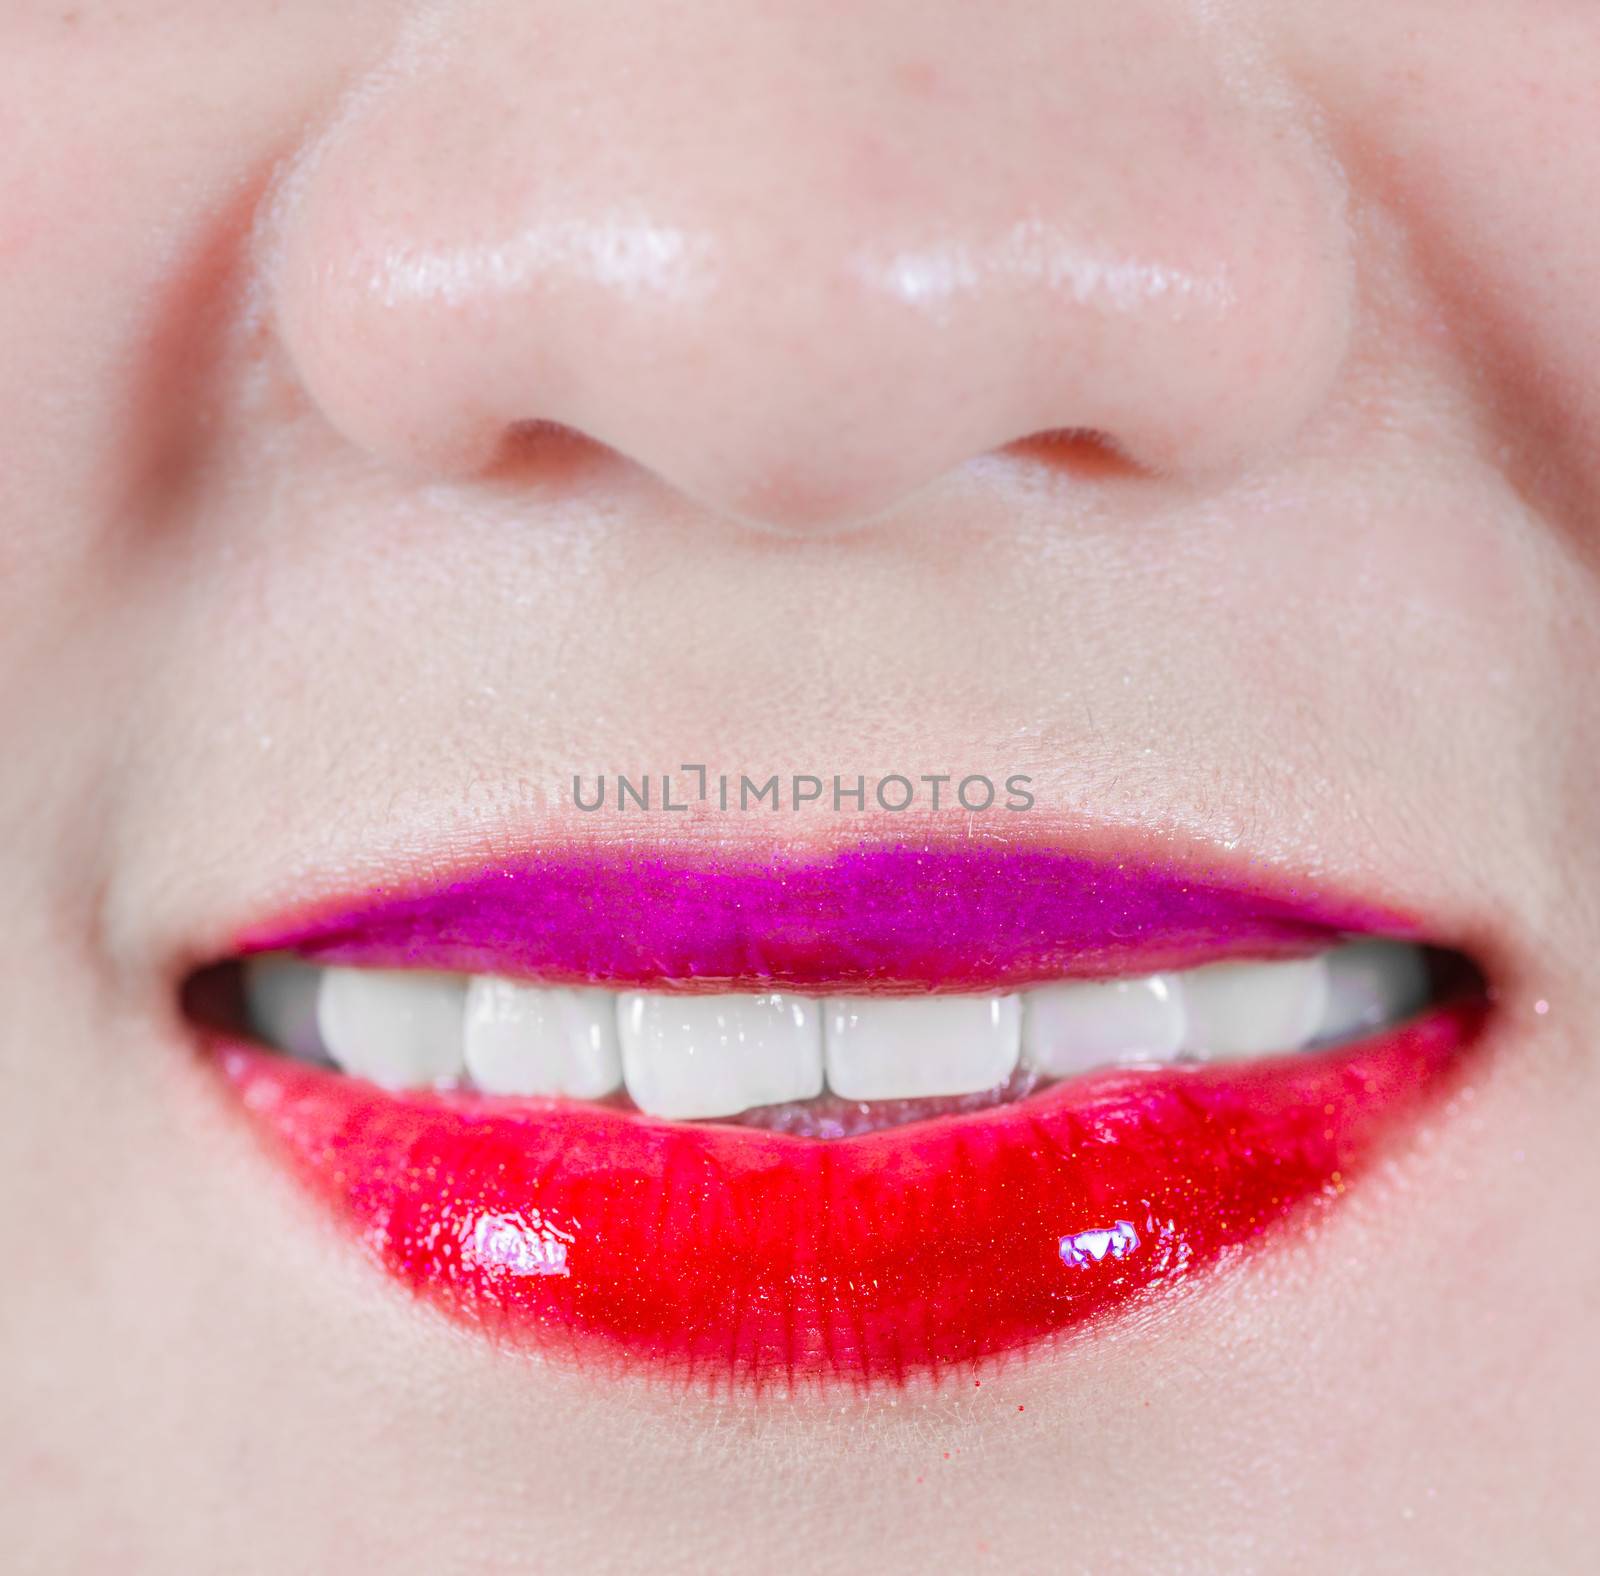 Woman lips with makeup smiling by IVYPHOTOS